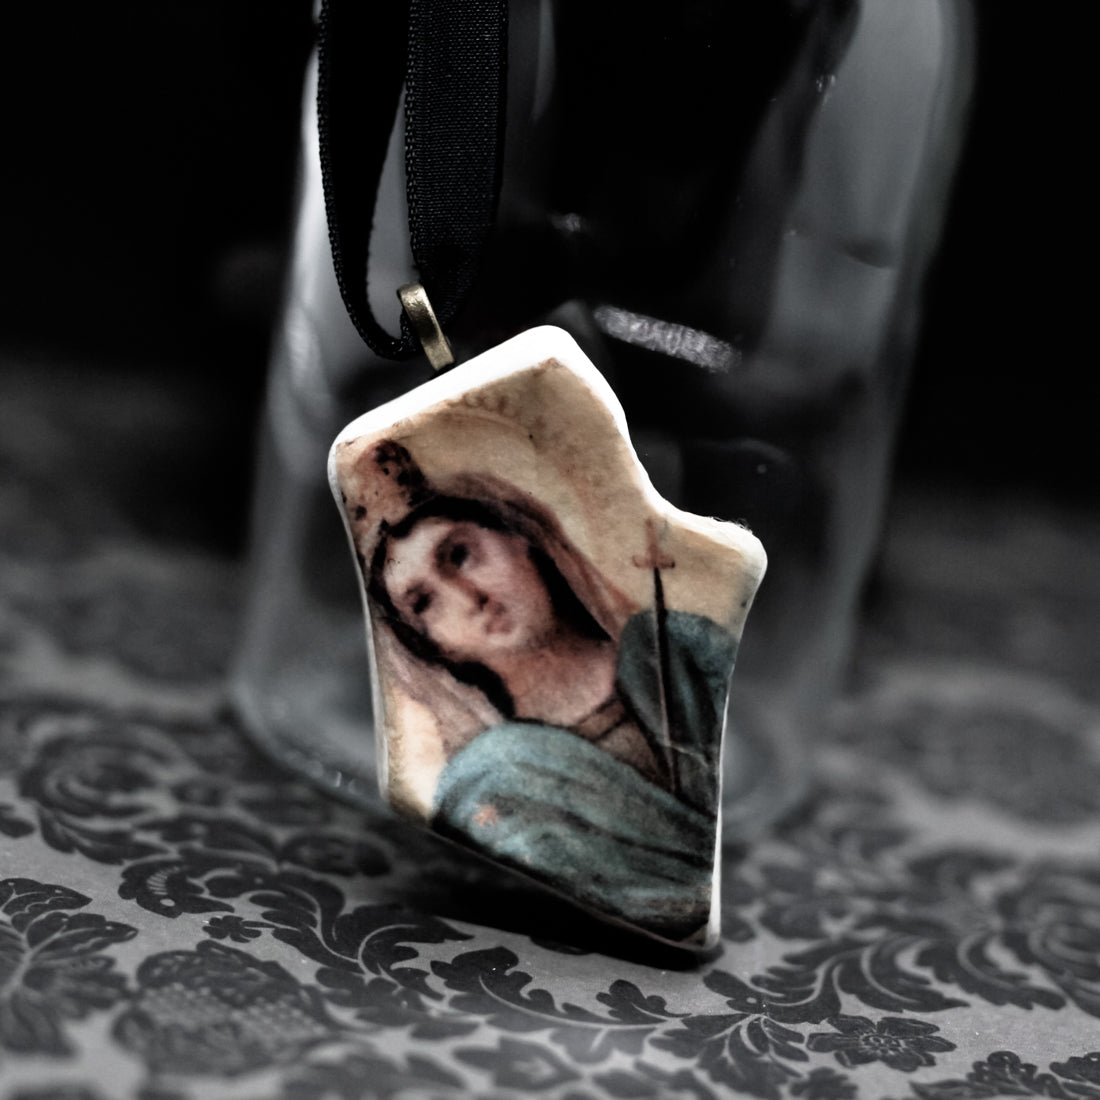 Our Lady Of Sorrows Necklace